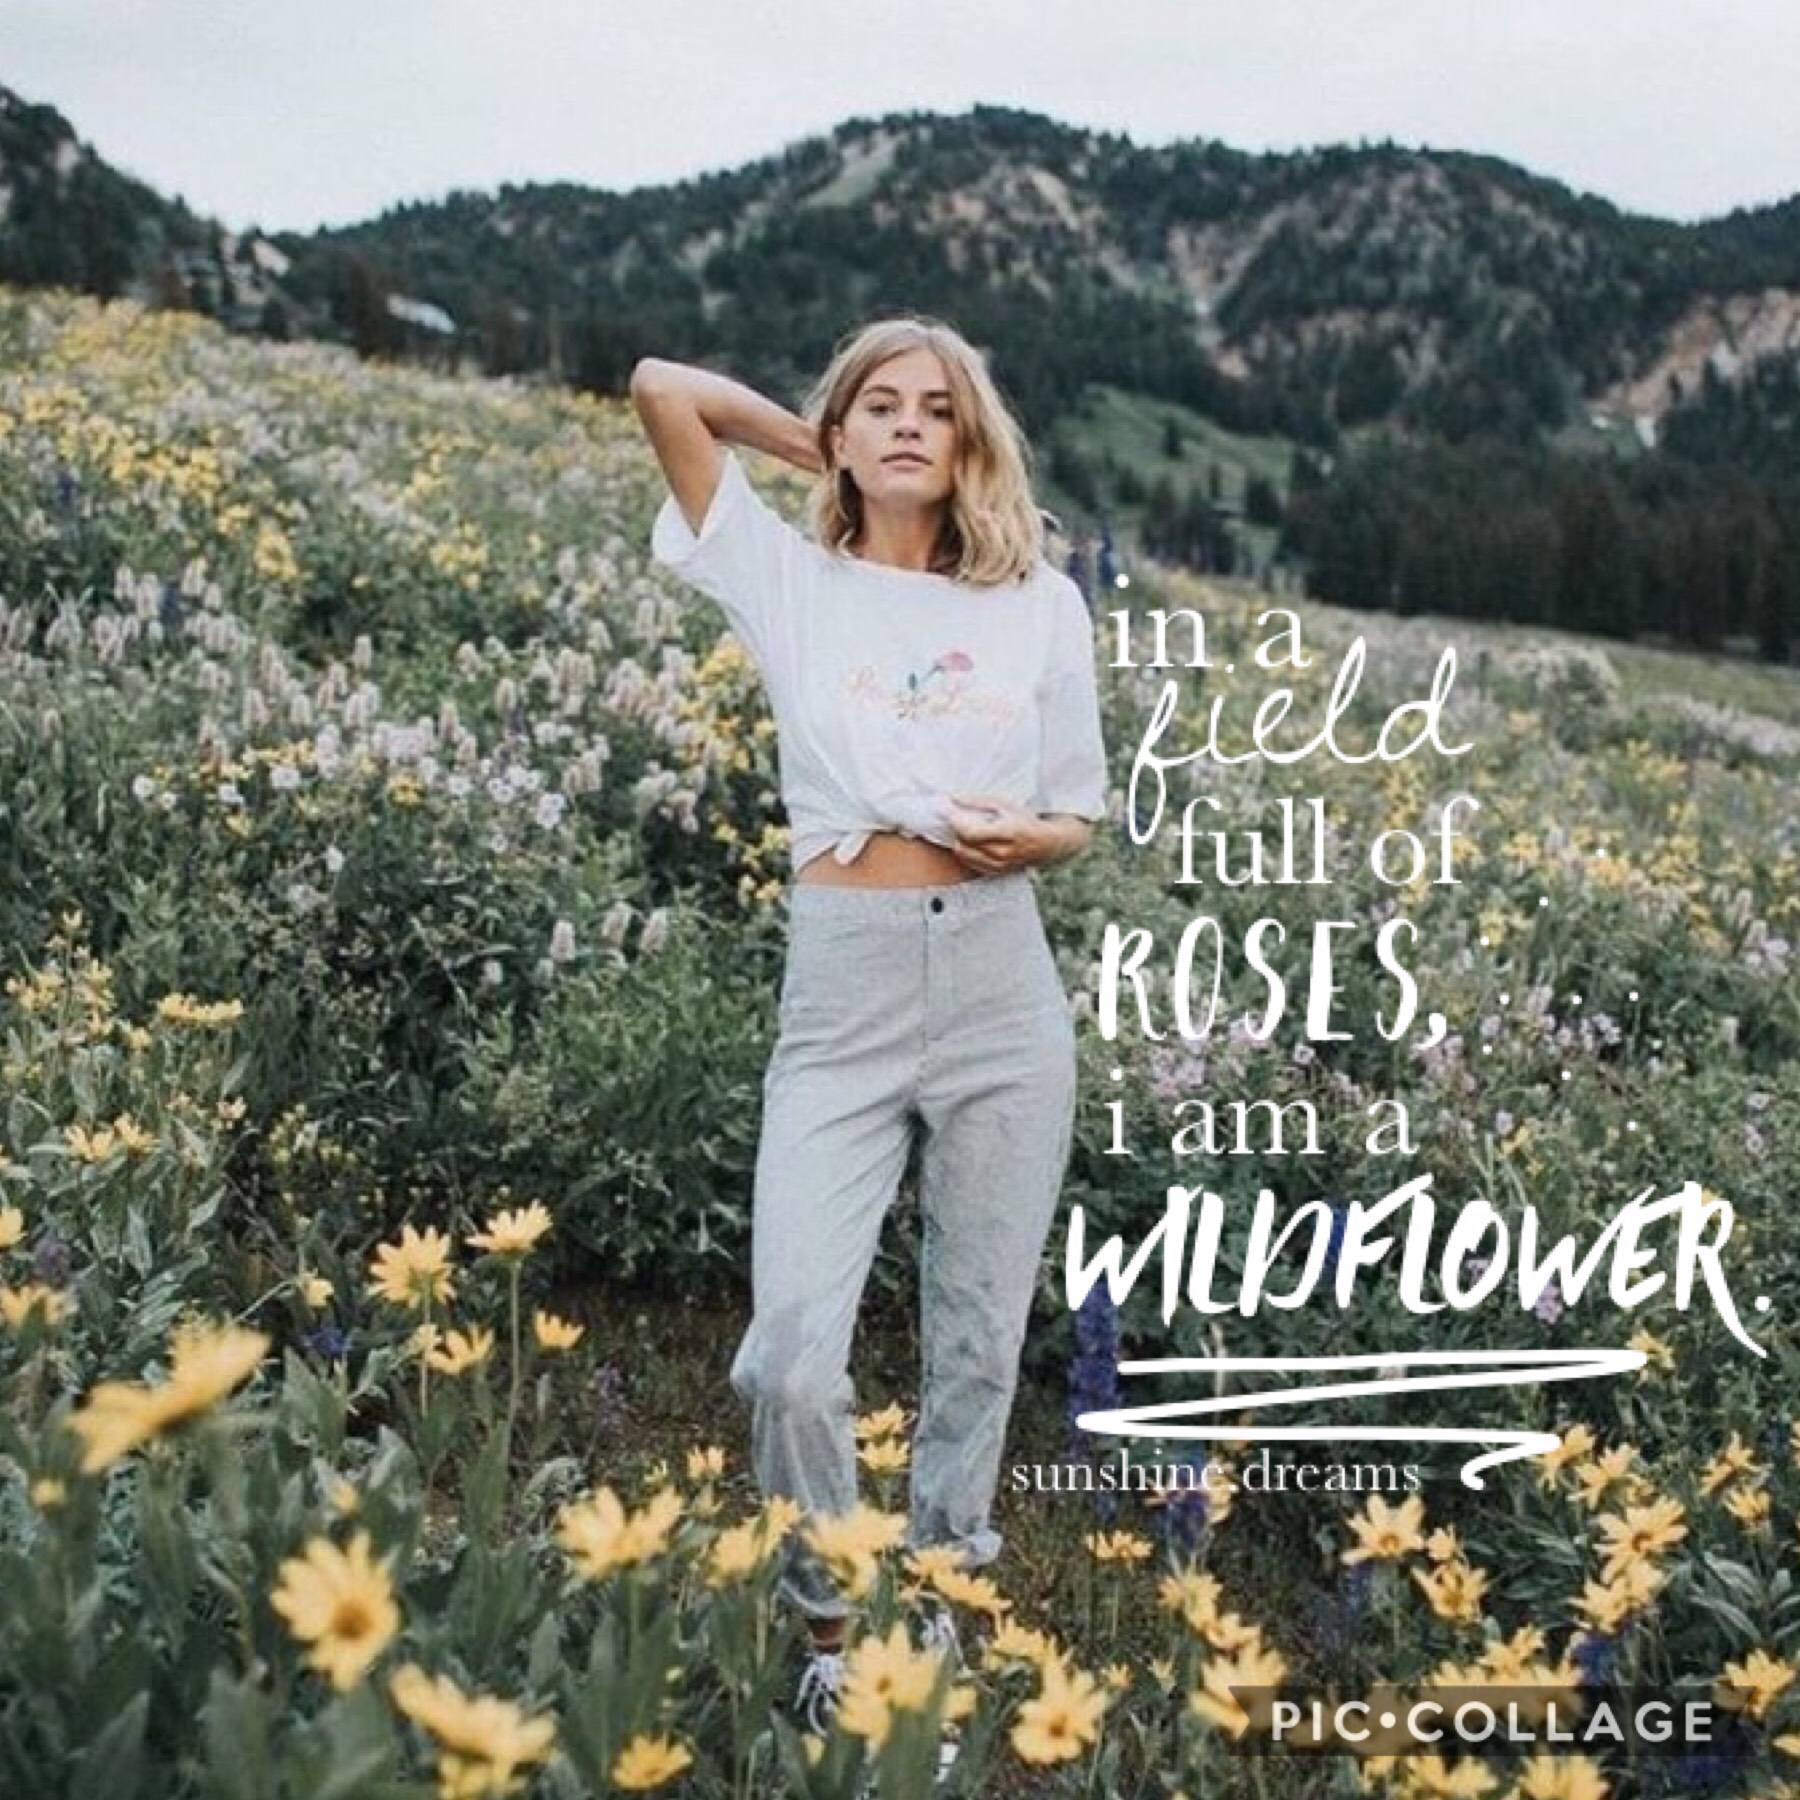 in a field full of roses, i am a wildflower🌾

wow, I’ve been posting a lot lately. Feeling very inspired.